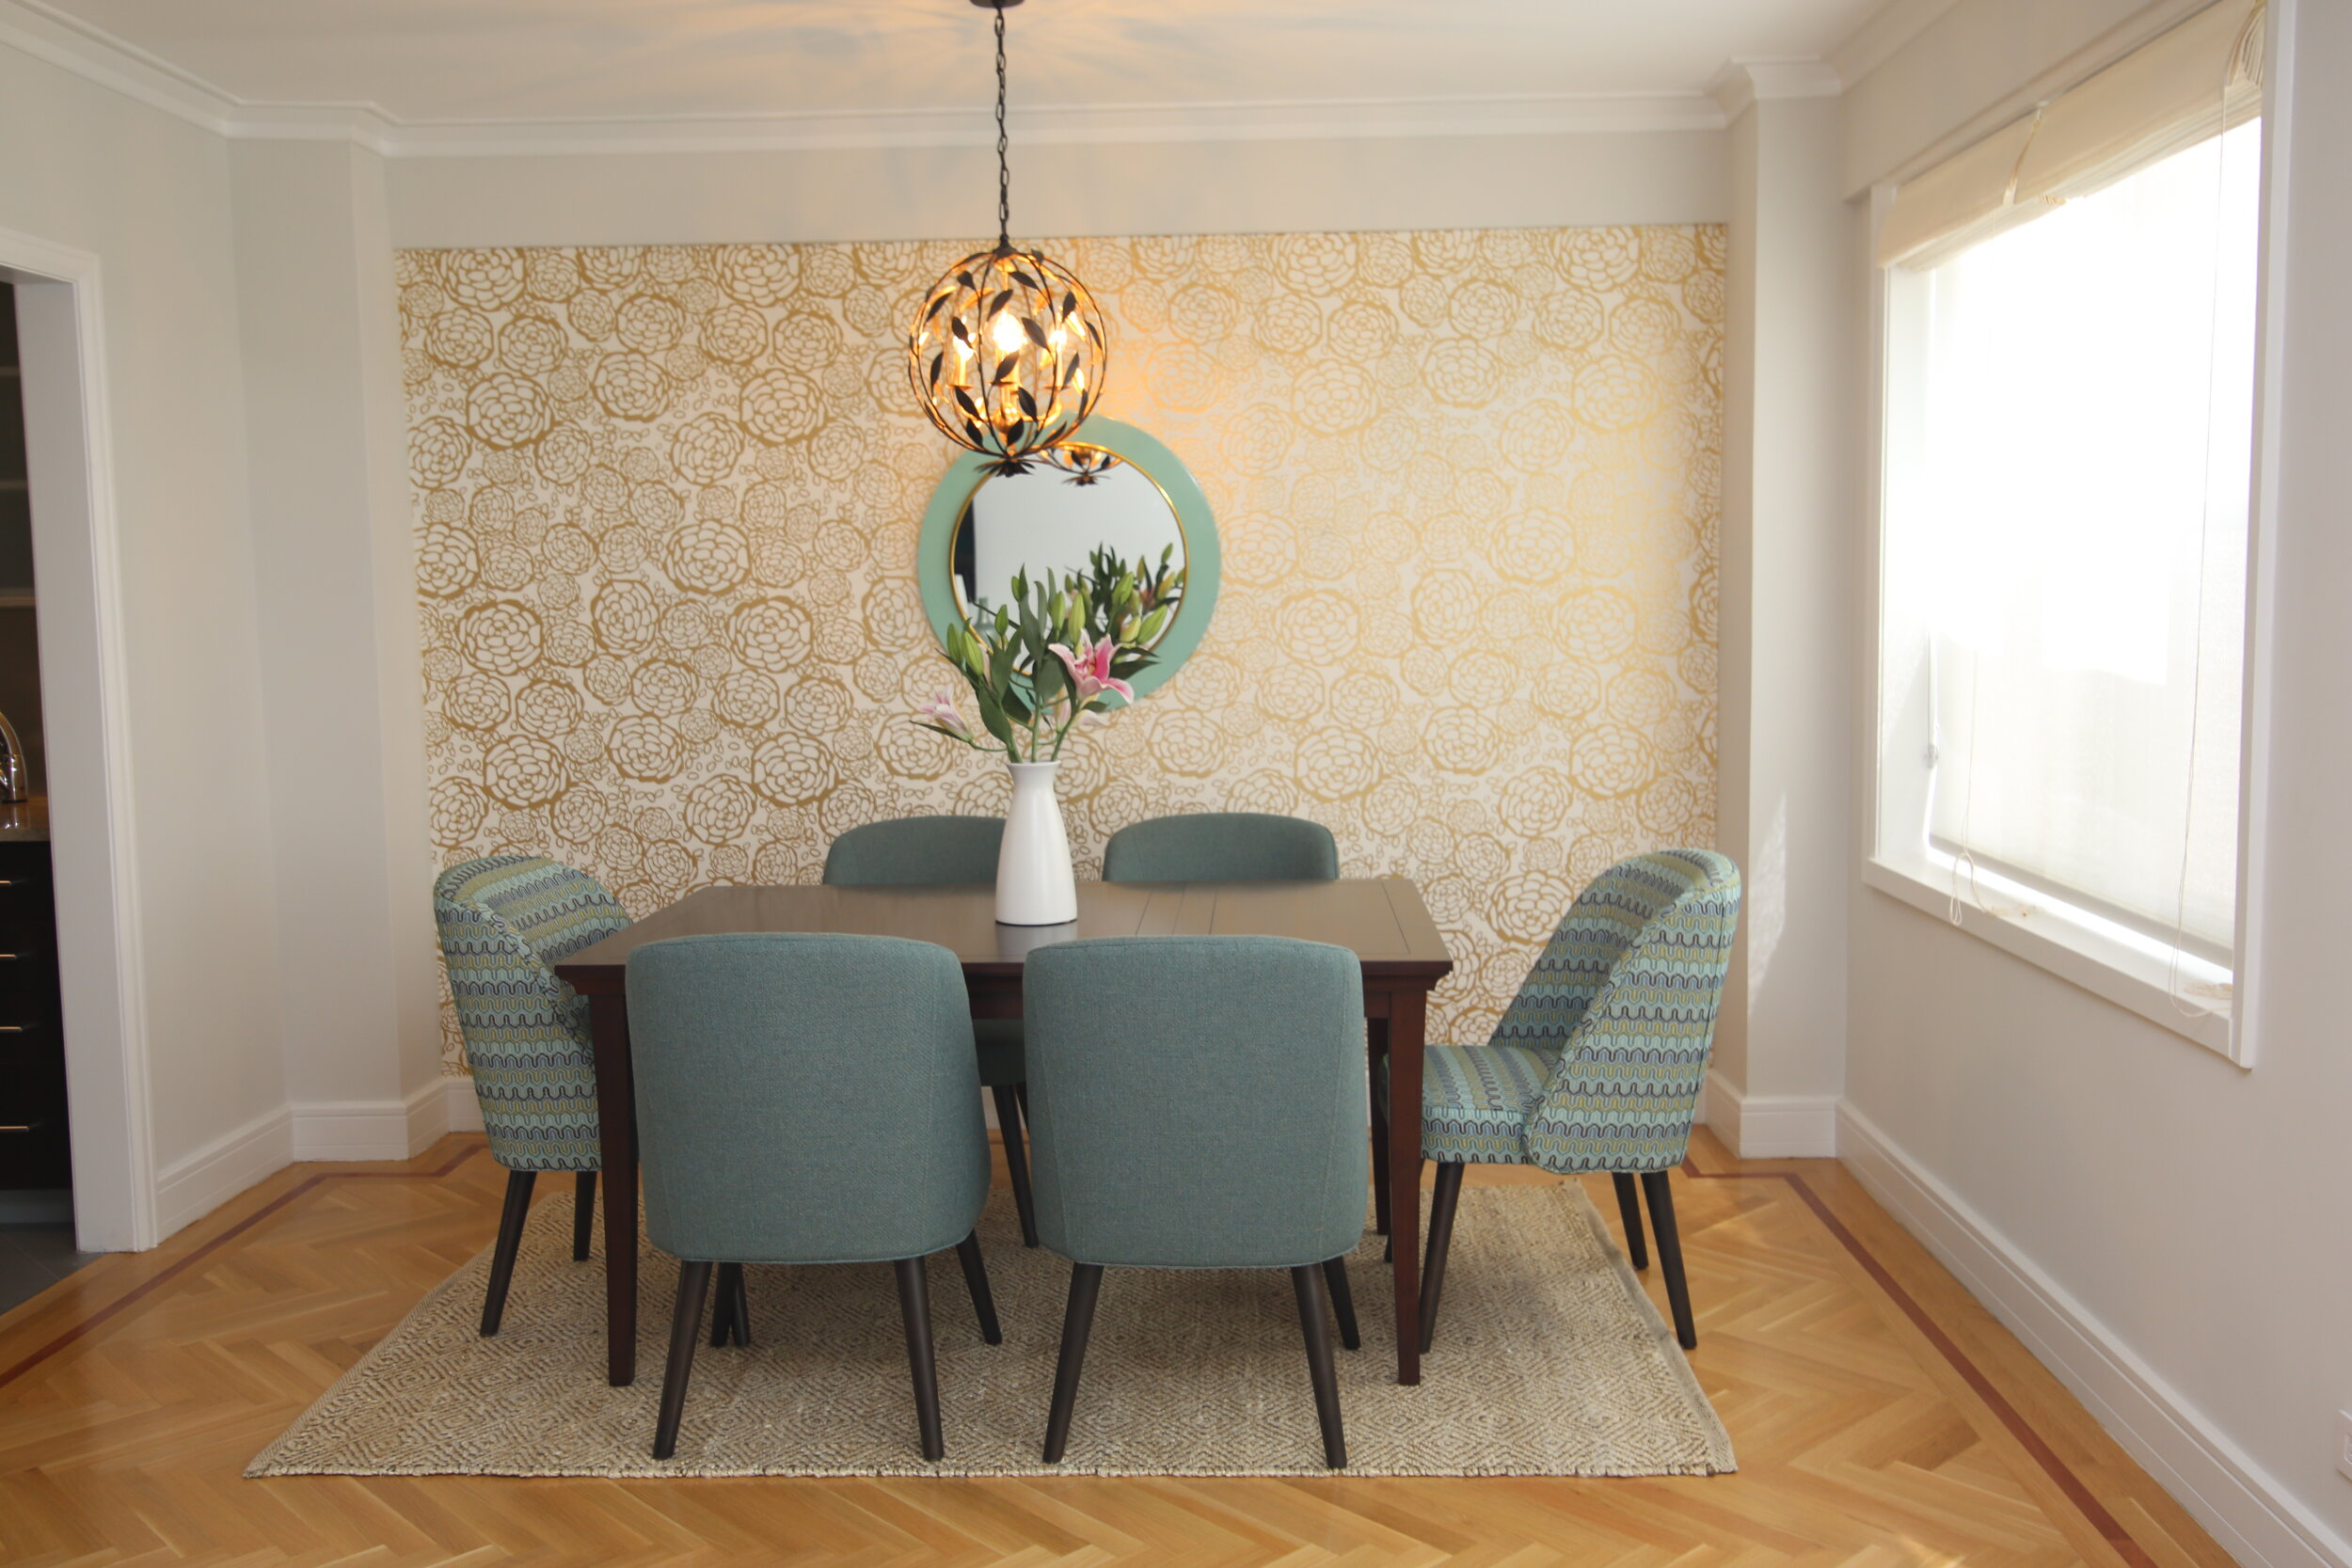 Dining room with different color chairs, gold floral chandelier and jute rug 